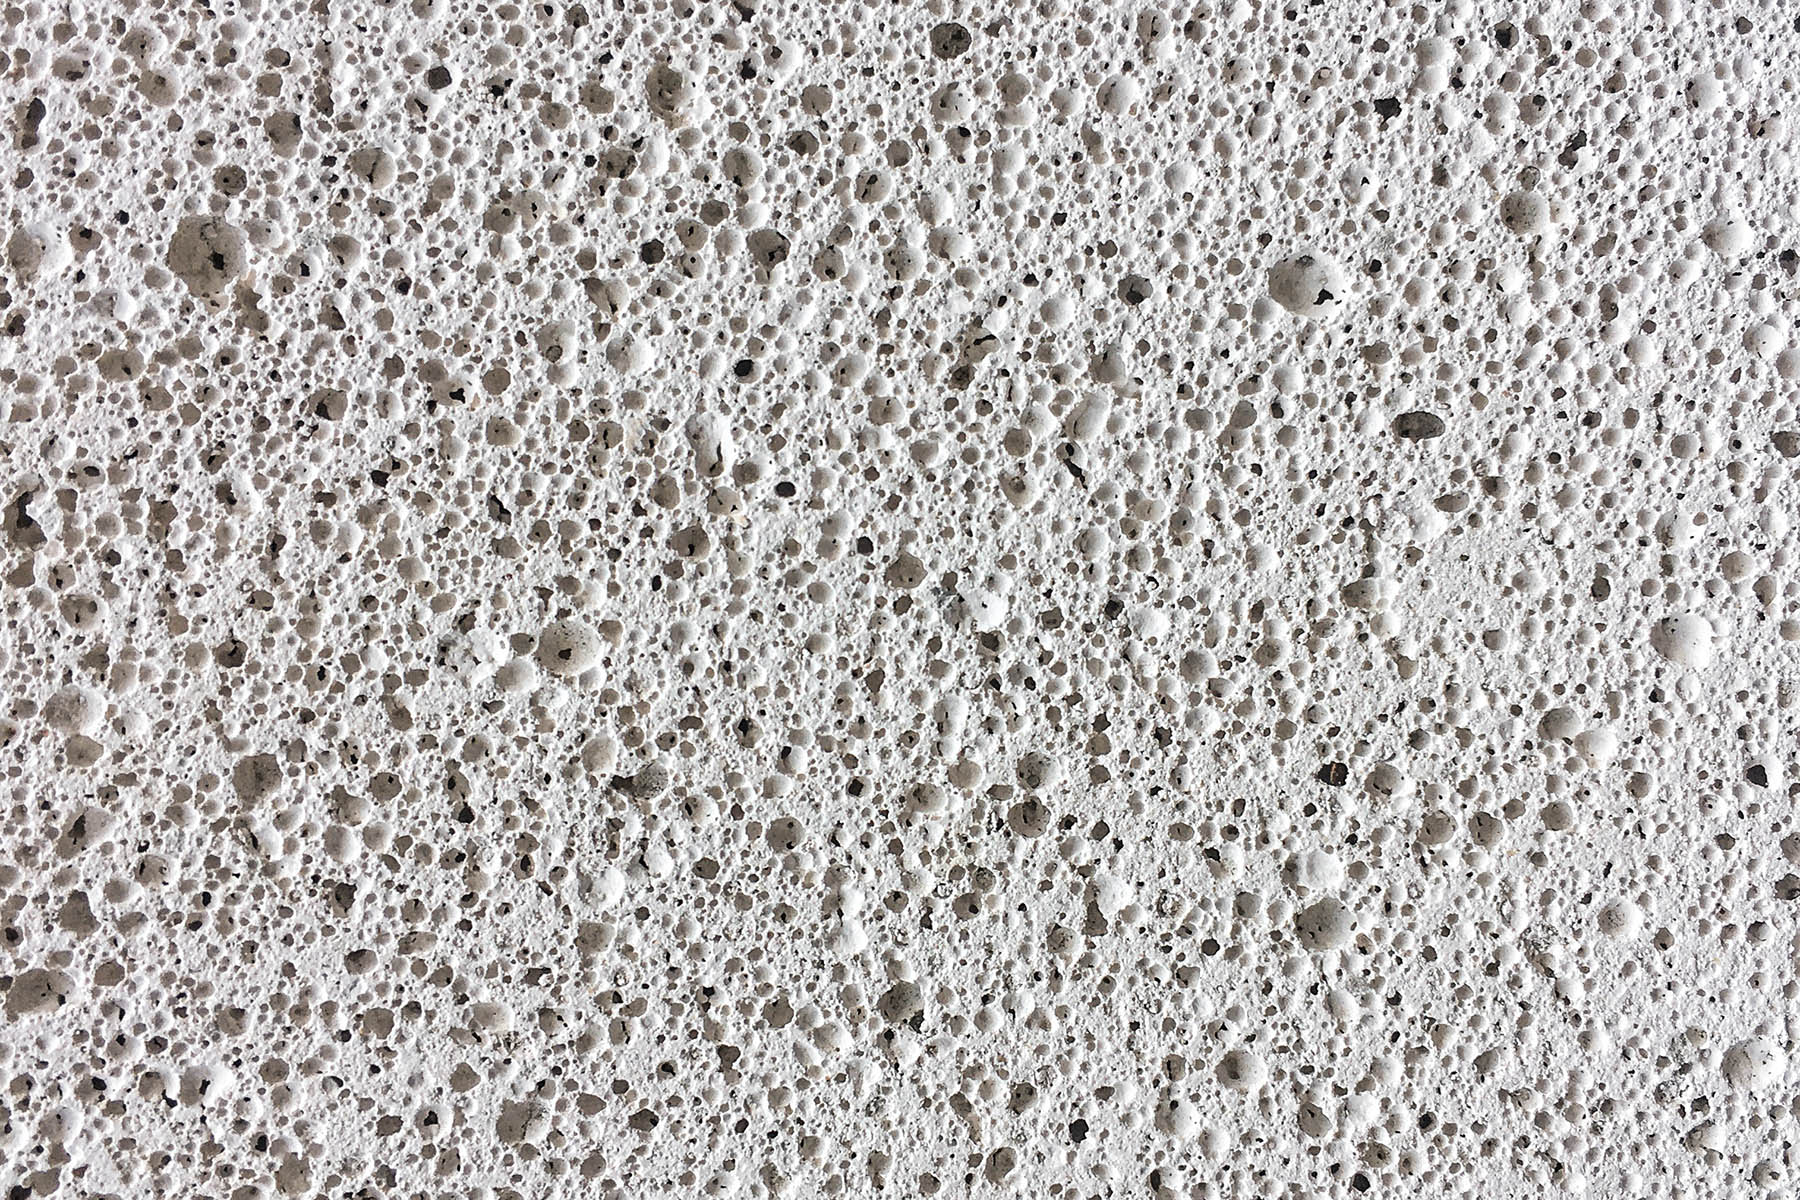 Lightweight Concrete: Advantages and Applications in Building Design